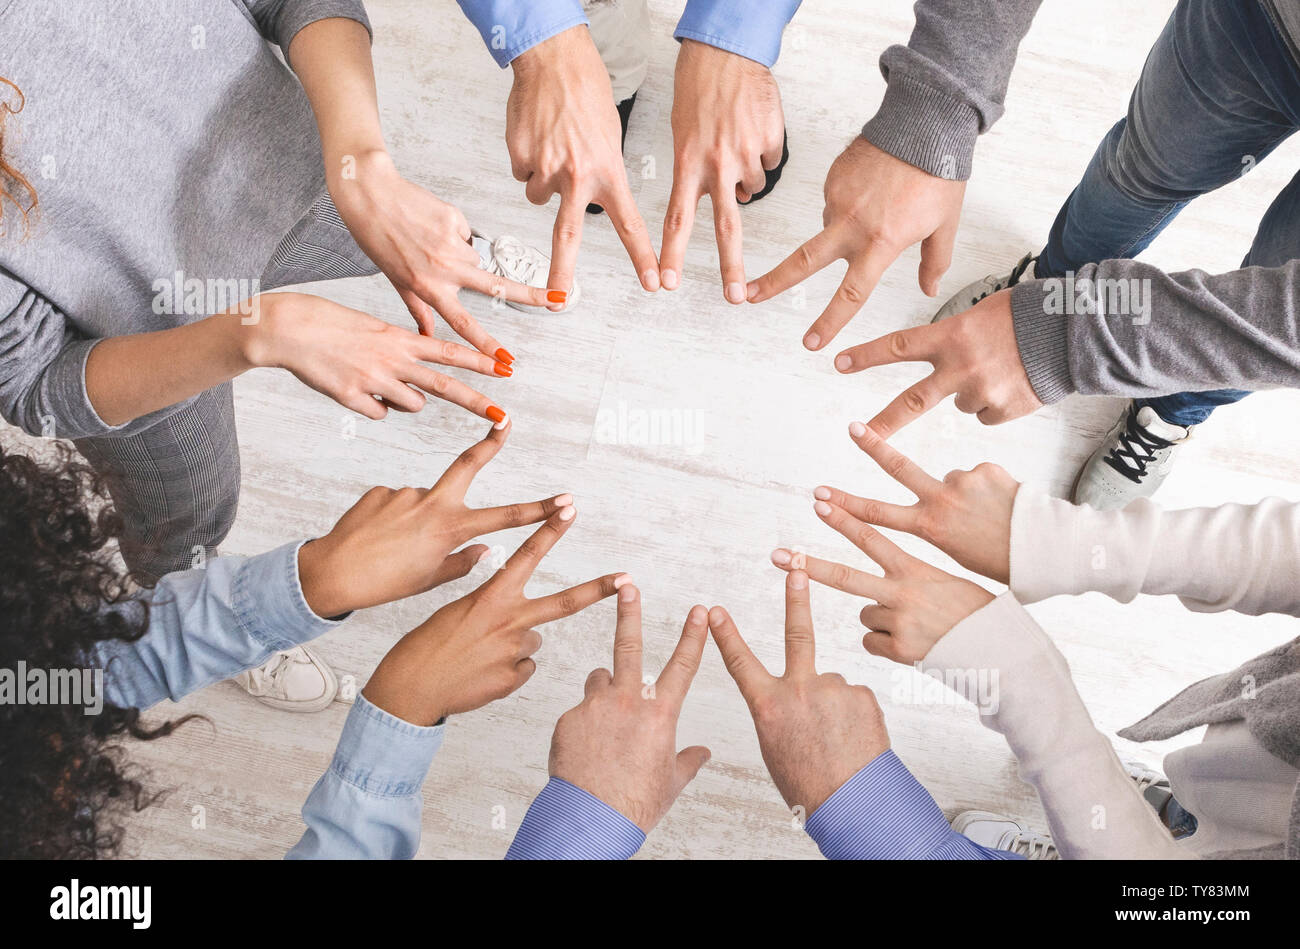 Group of hands showing peace hand sign, top view Stock Photo